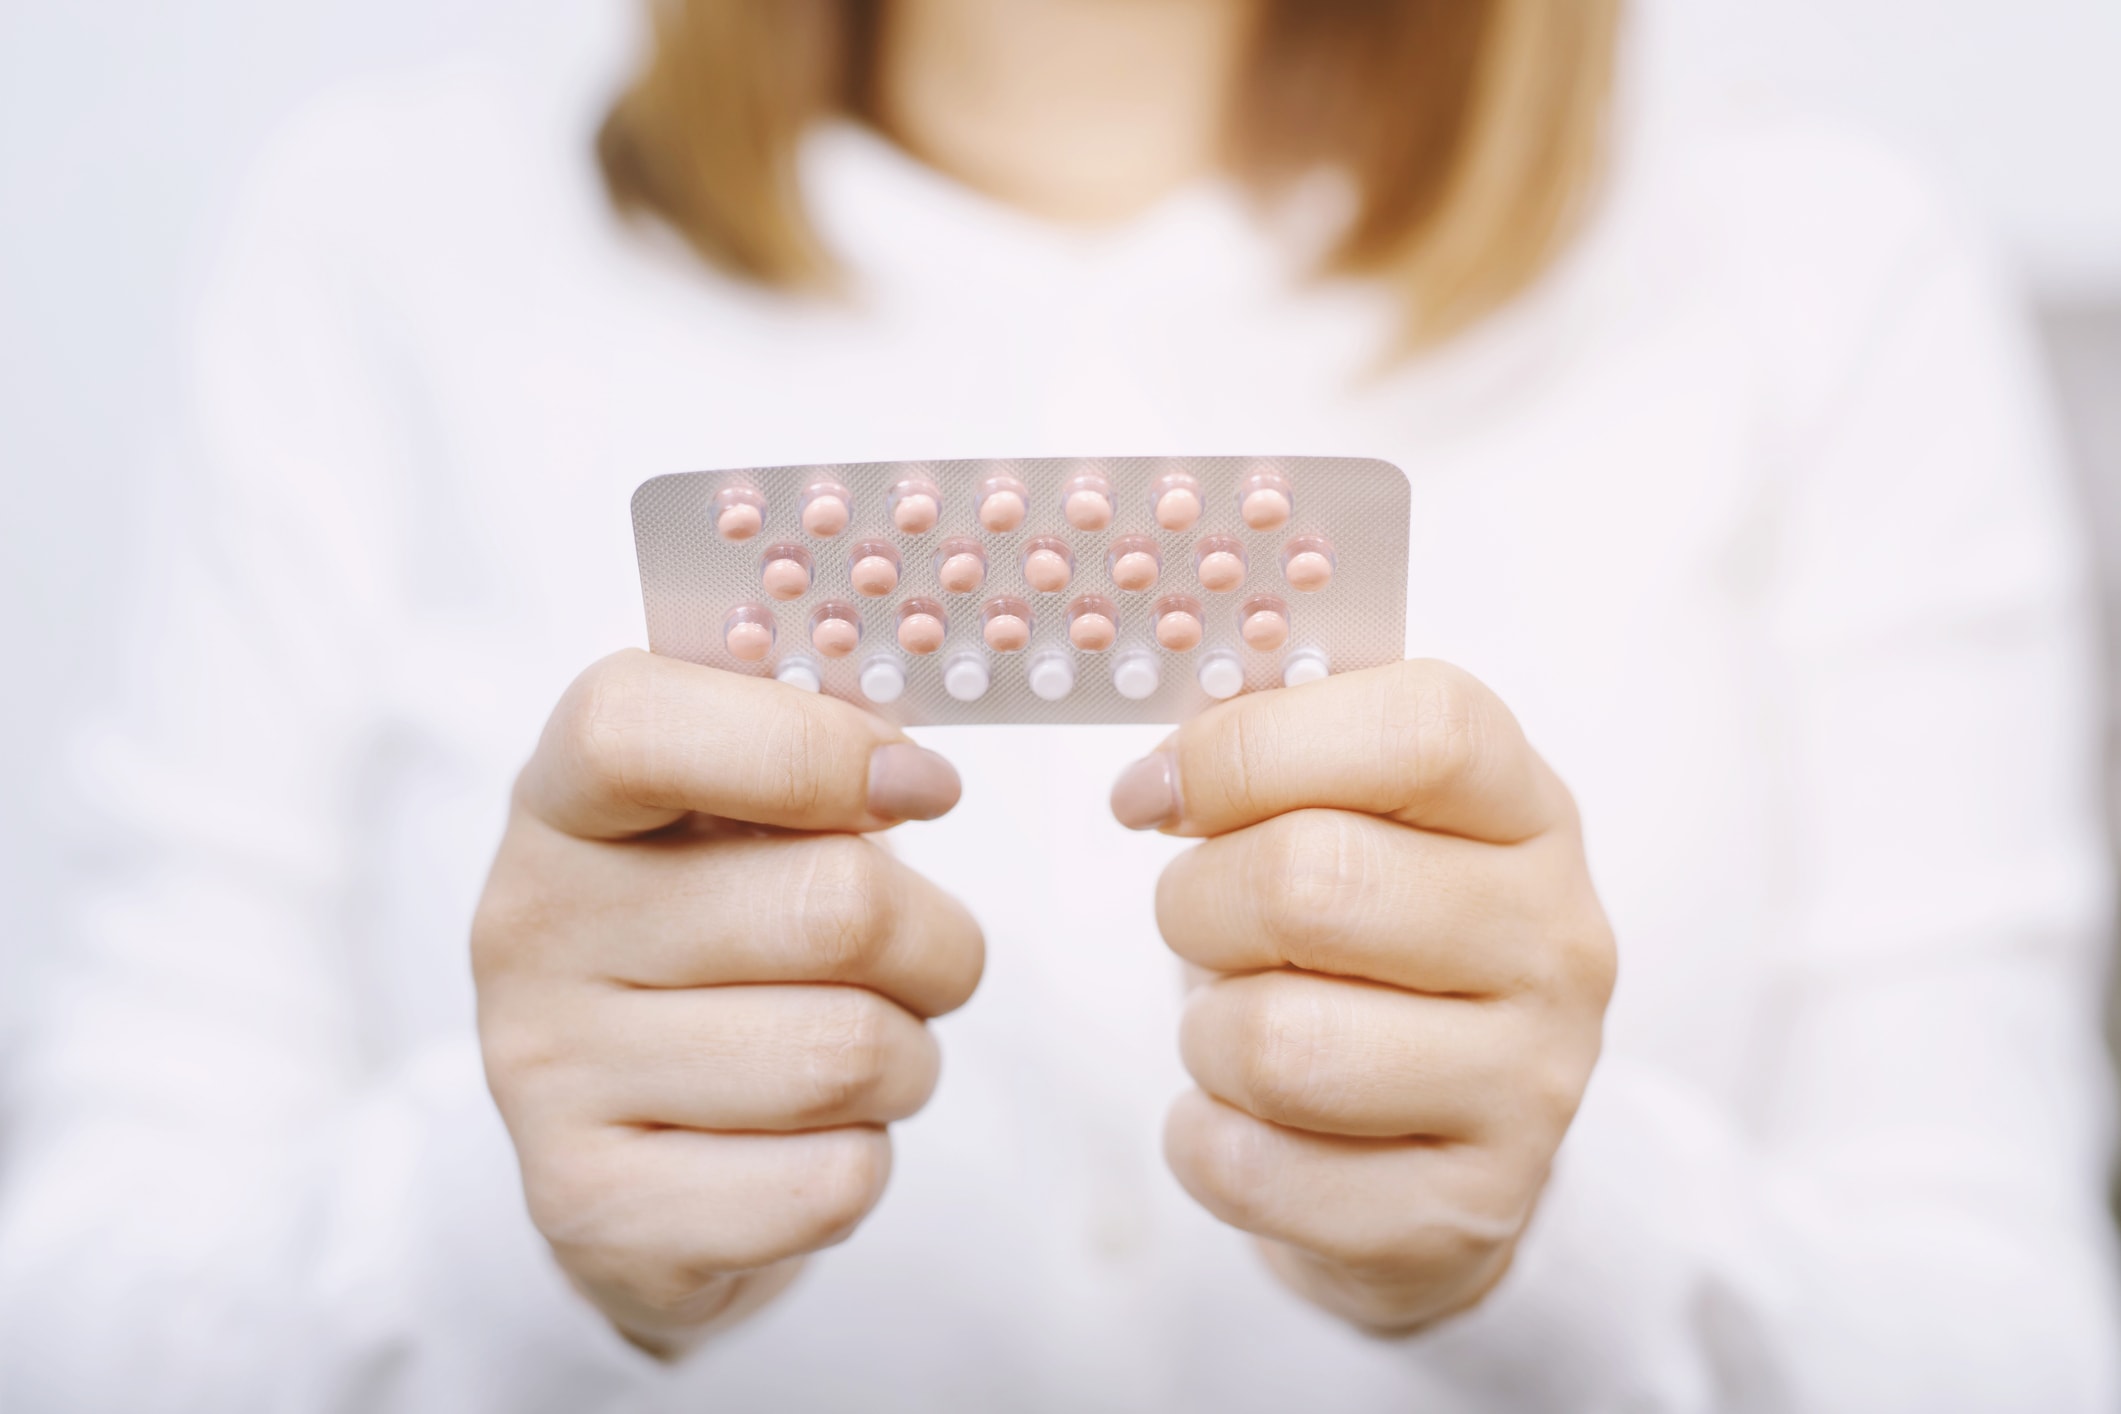 The Untold Story of the Contraceptive Pill